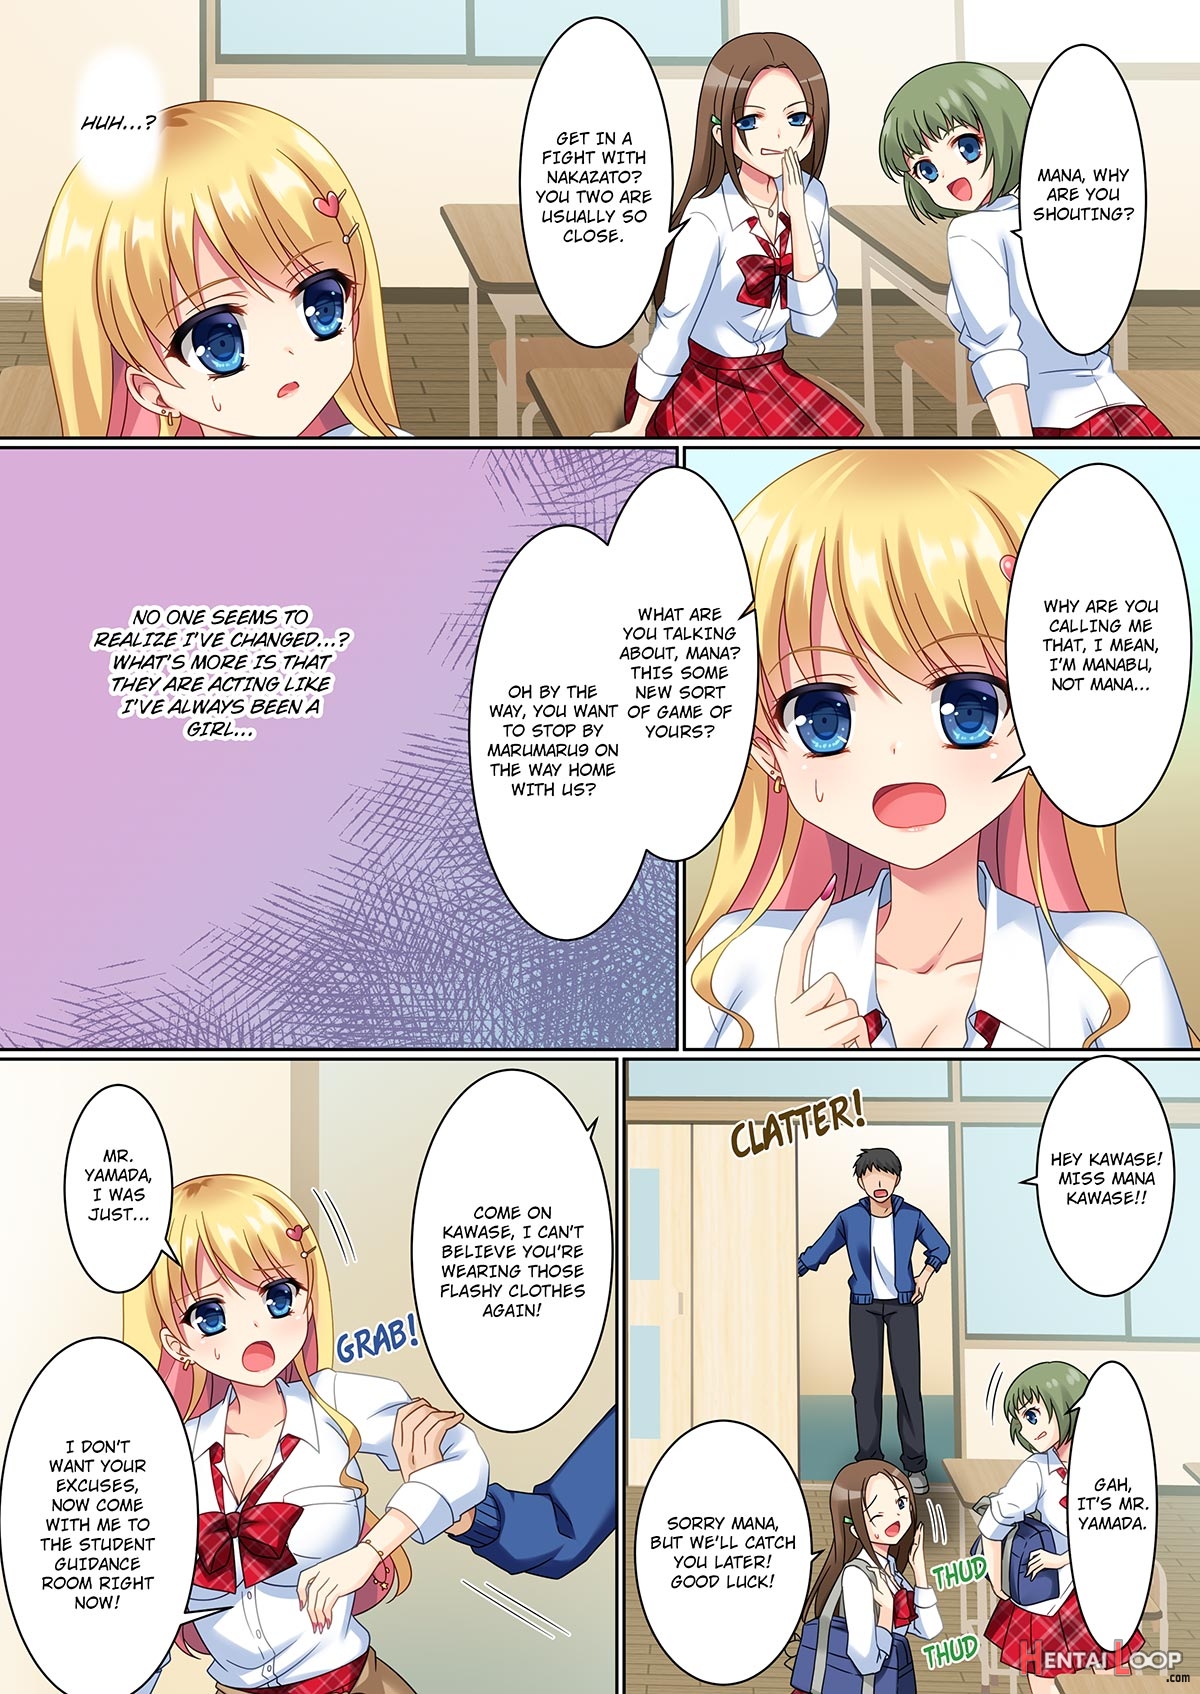 Cos-change! ~how I♂ Was Transformed Into A Cosplay Gyaru♀~ page 6